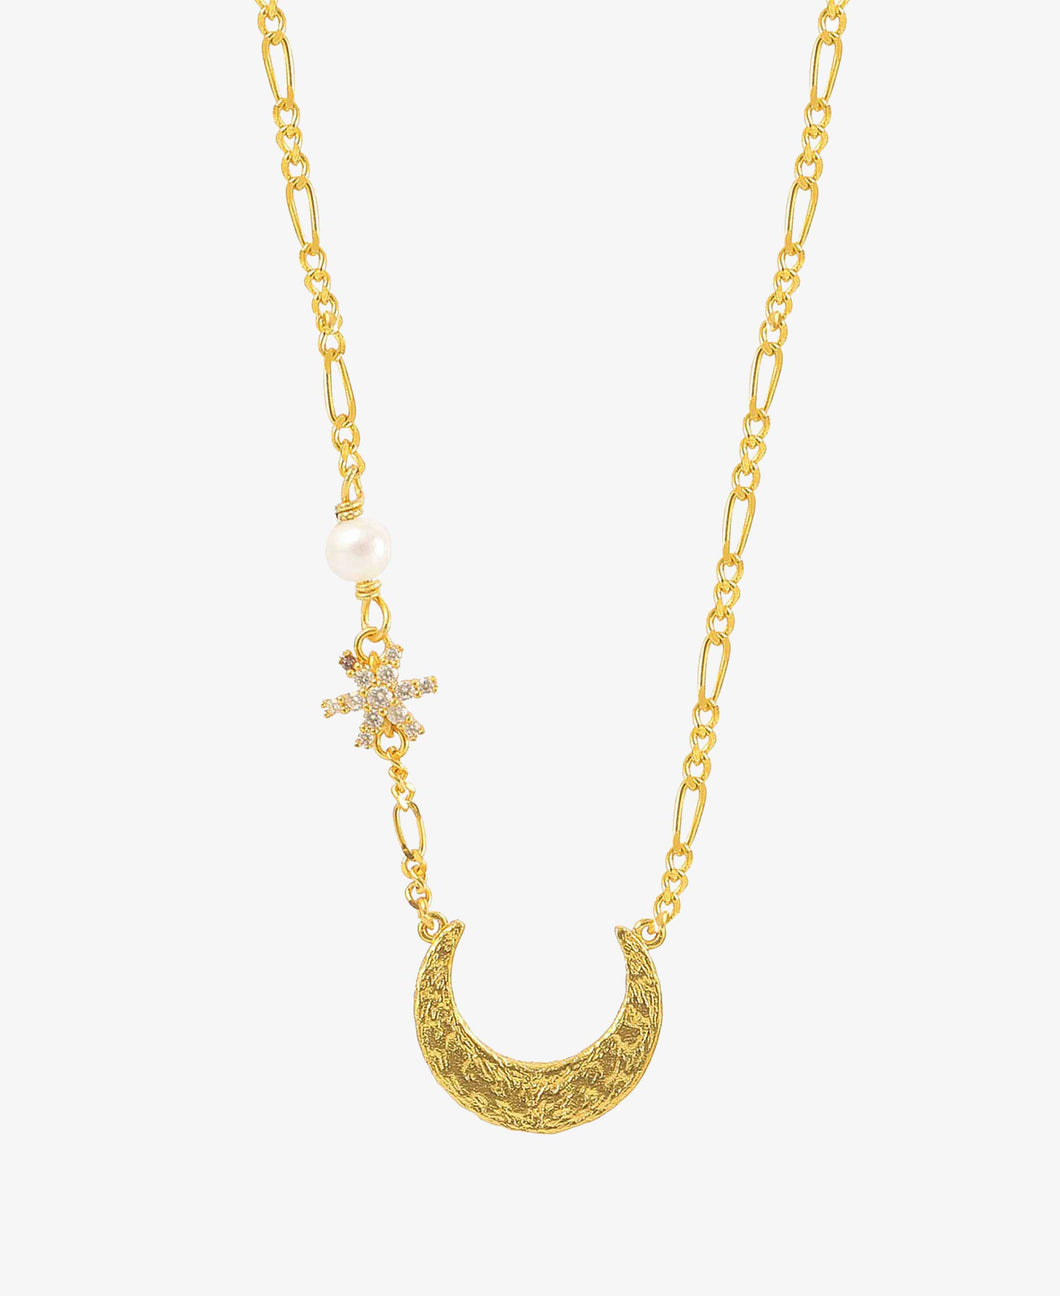 Hultquist 18K Gold Plated Galaxy Necklace